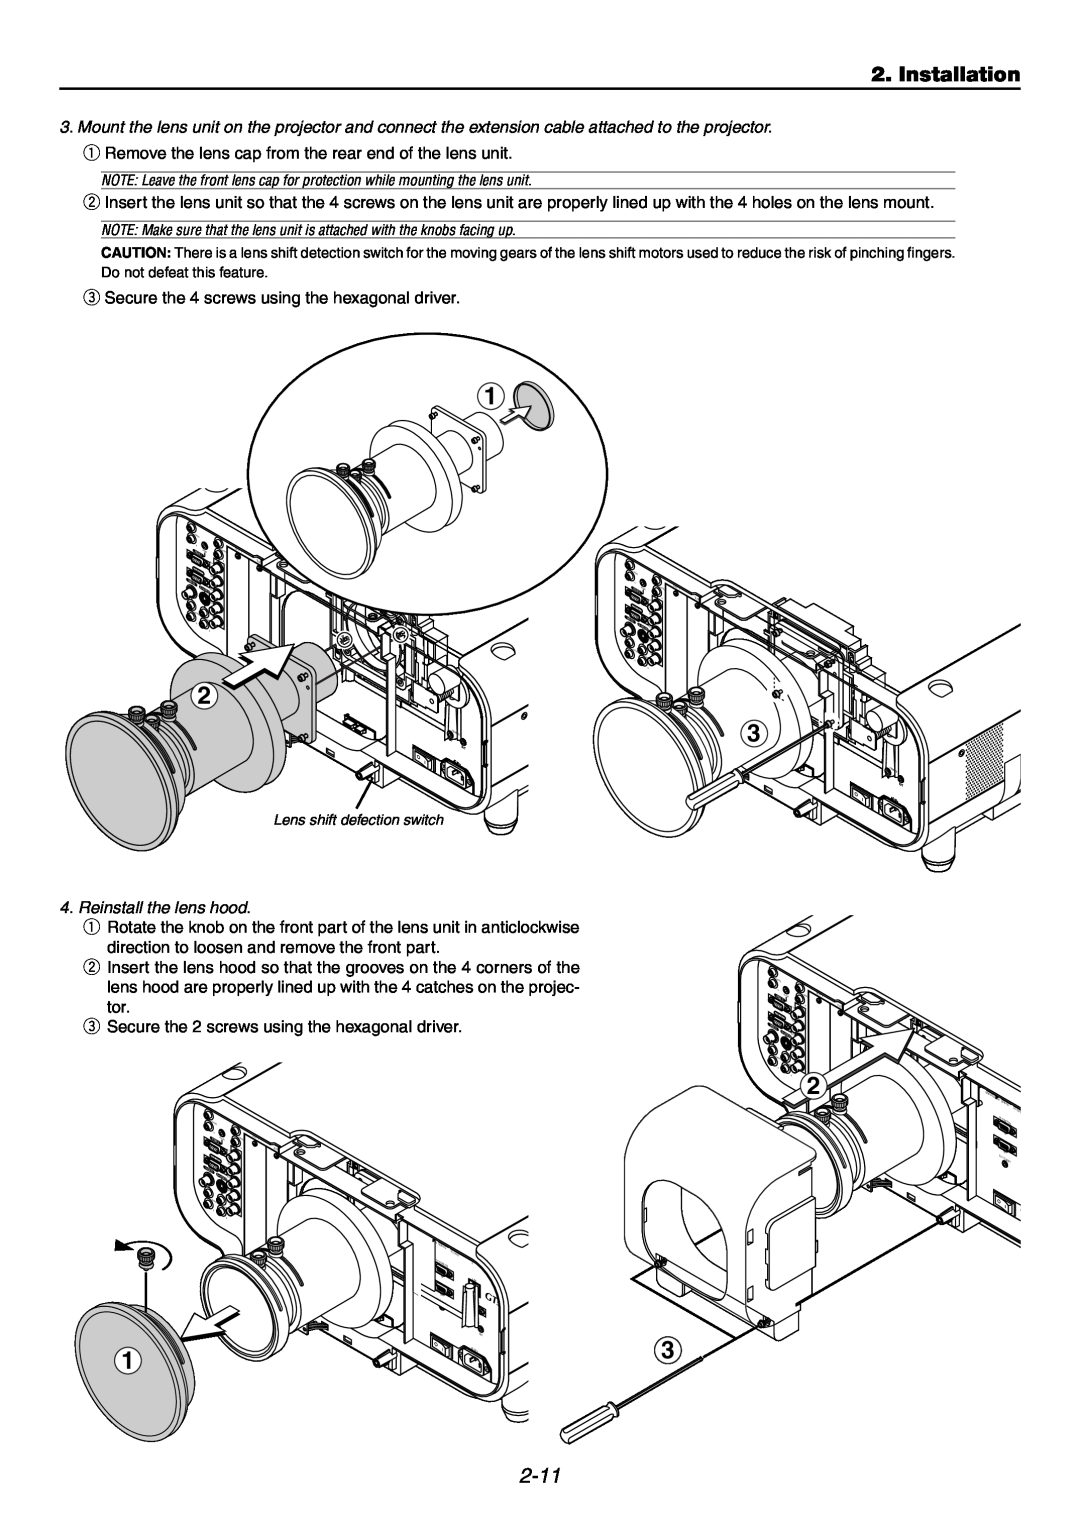 NEC GT6000 user manual Installation, 2-11, e Secure the 4 screws using the hexagonal driver 